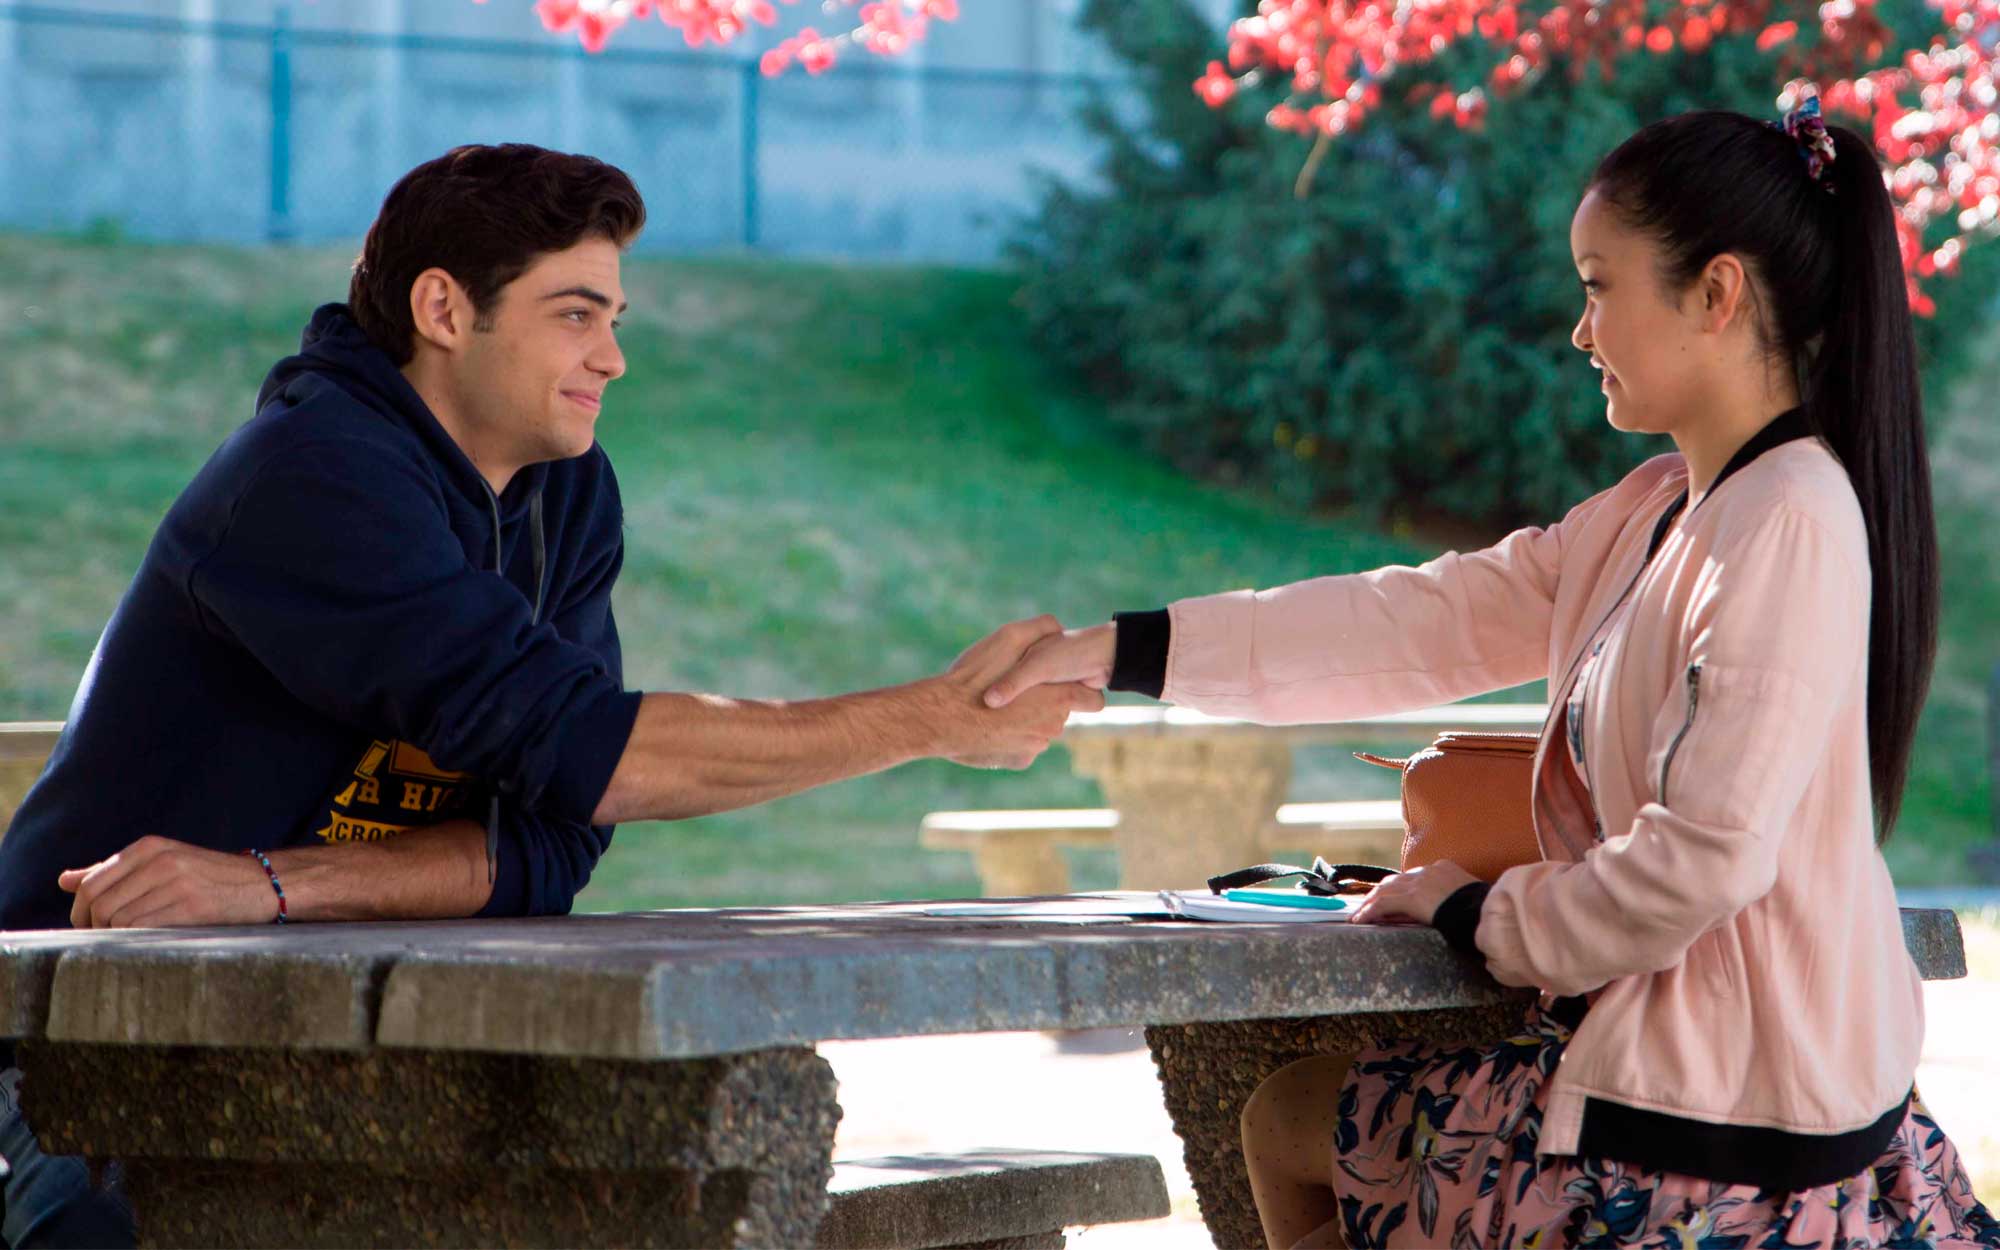 Movie Review: 'To All The Boys I’ve Loved Before'